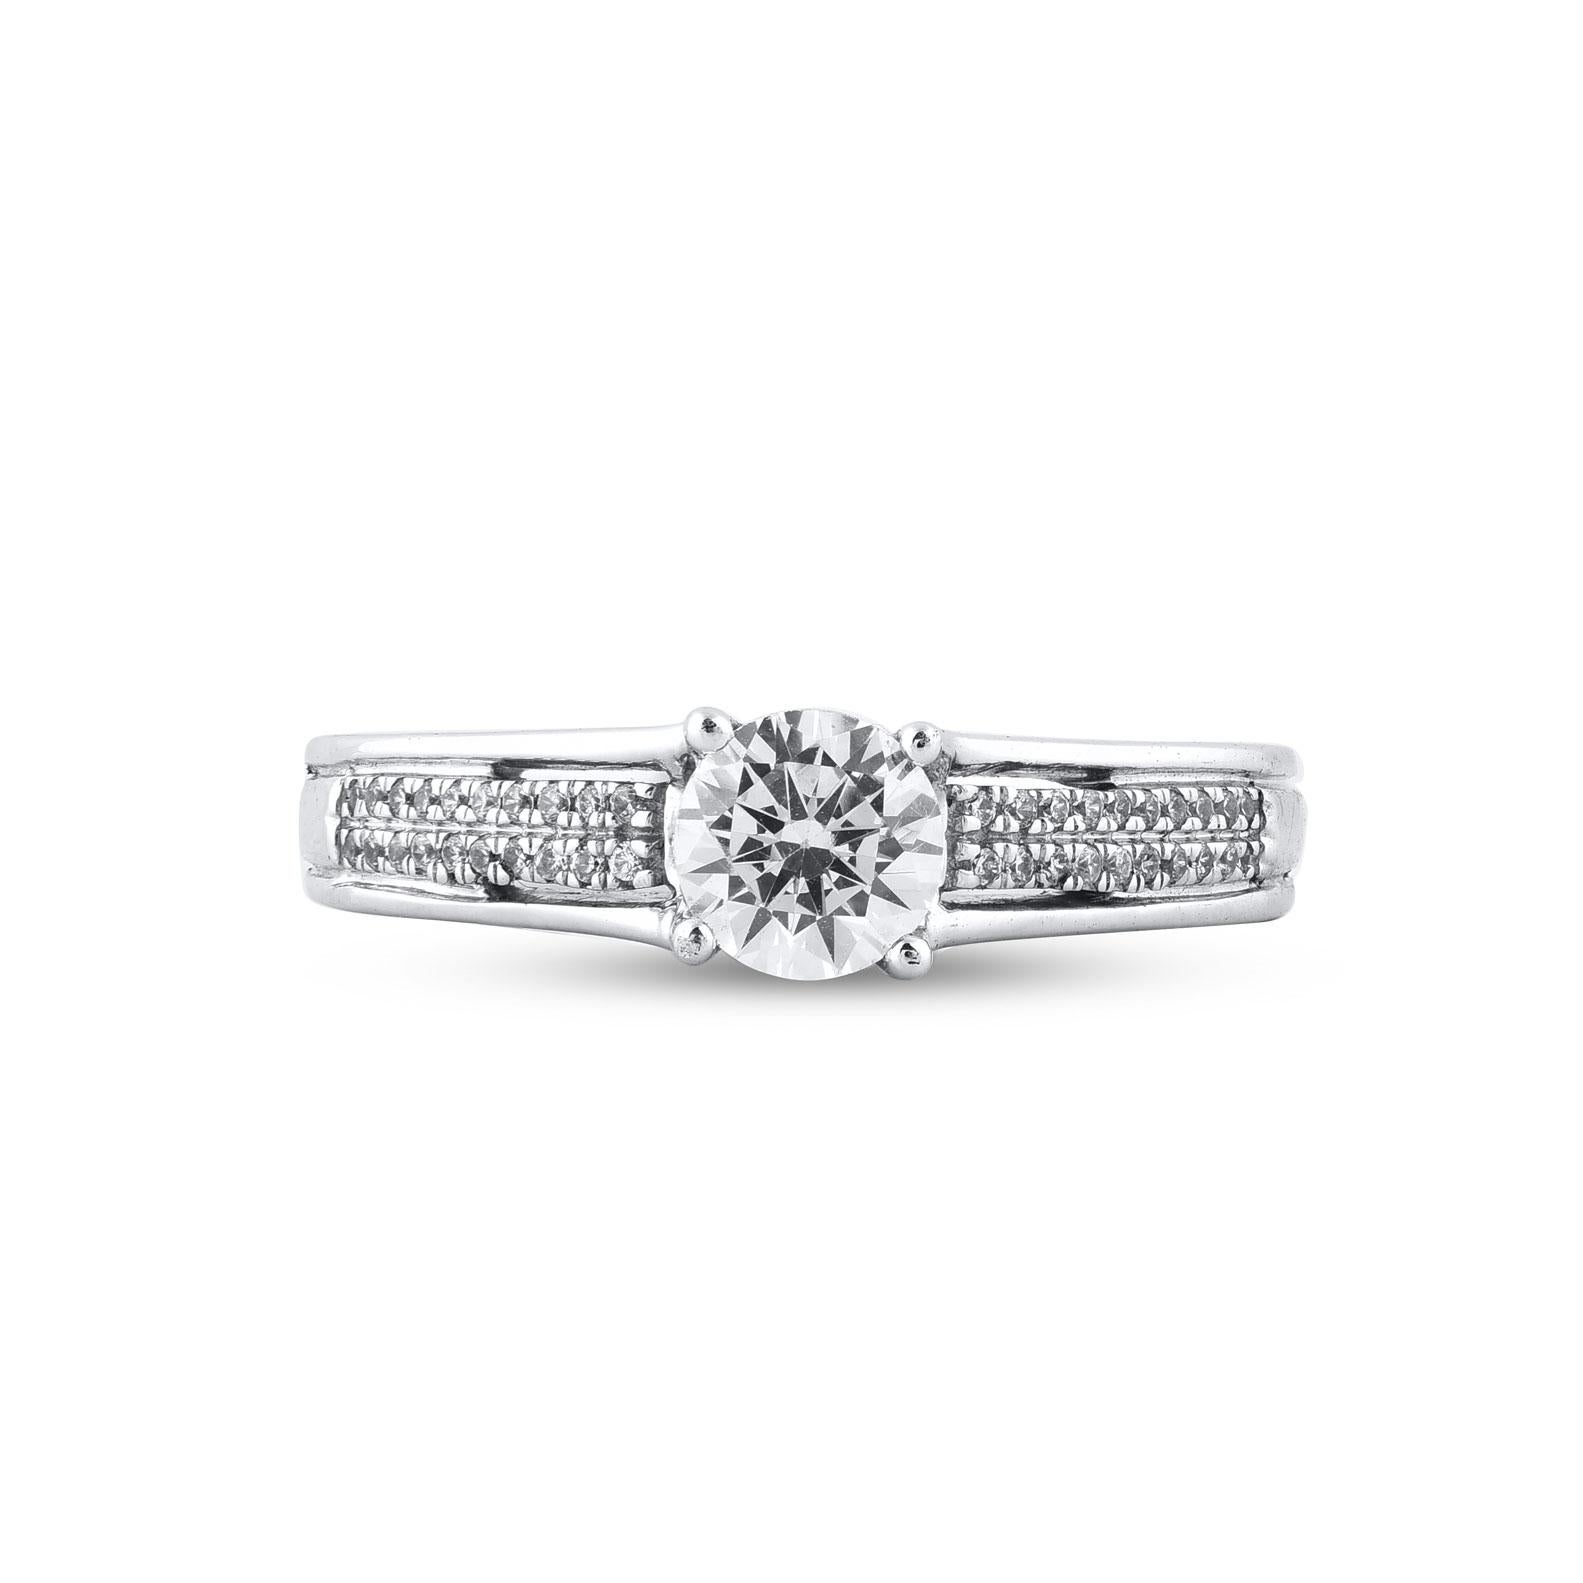 Classic and Contemporary, this diamond ring will enhance her jewelry collection. Expertly crafted in 14 Karat white gold and shines with 41 single cut and brilliant cut diamond in prong and pave setting. The total weight of diamonds 0.75 carat, H-I